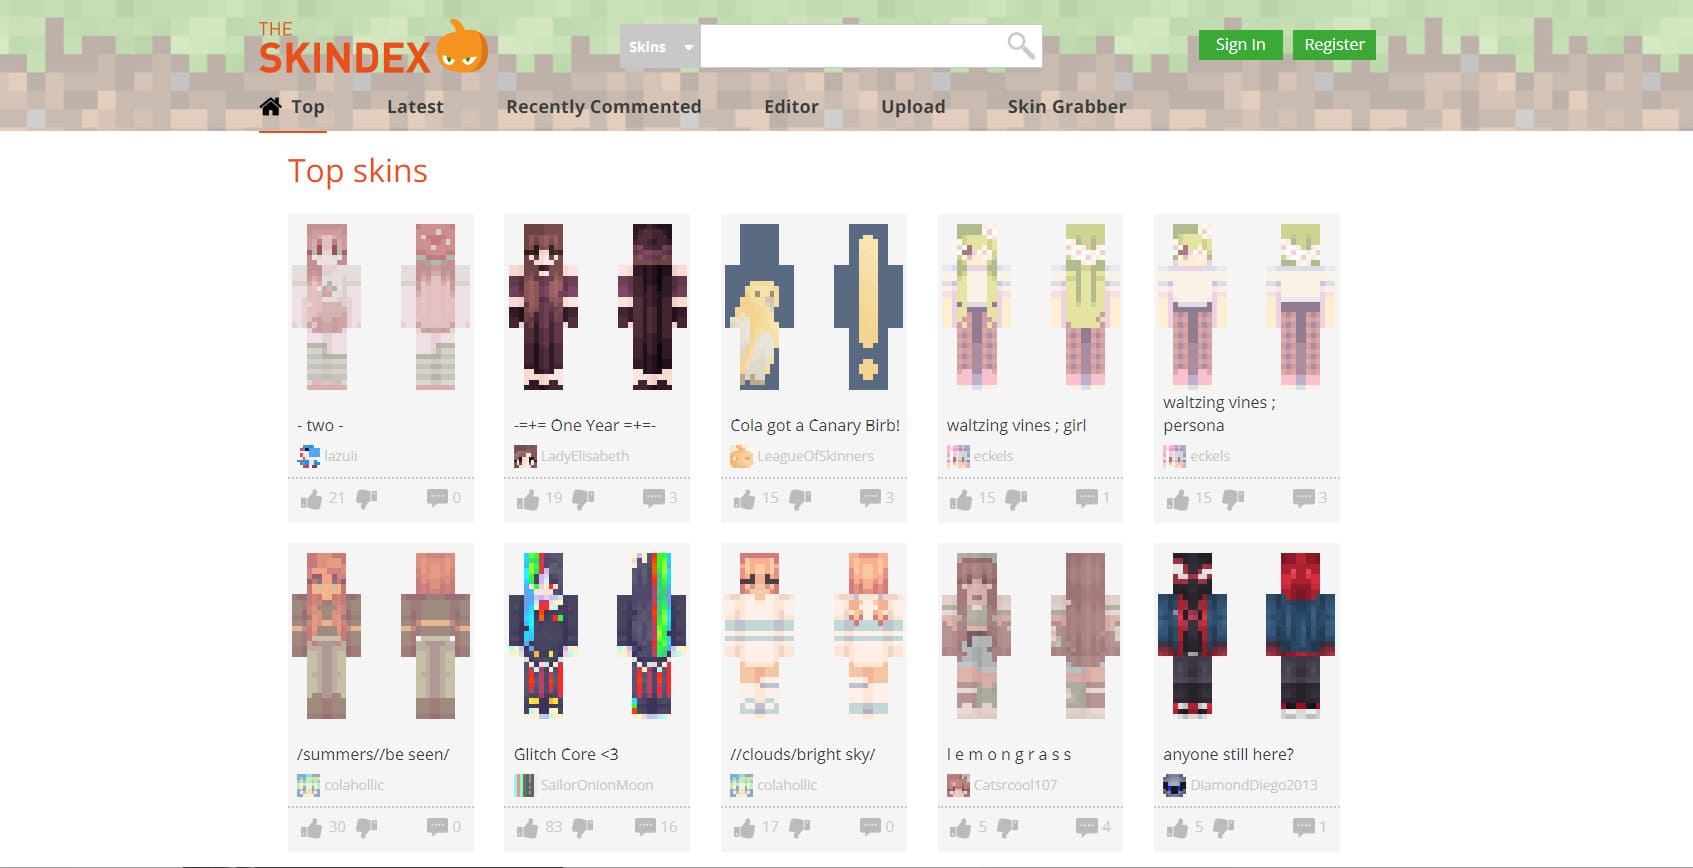 How to Download and Install Skins in Minecraft in 2022 (Guide)